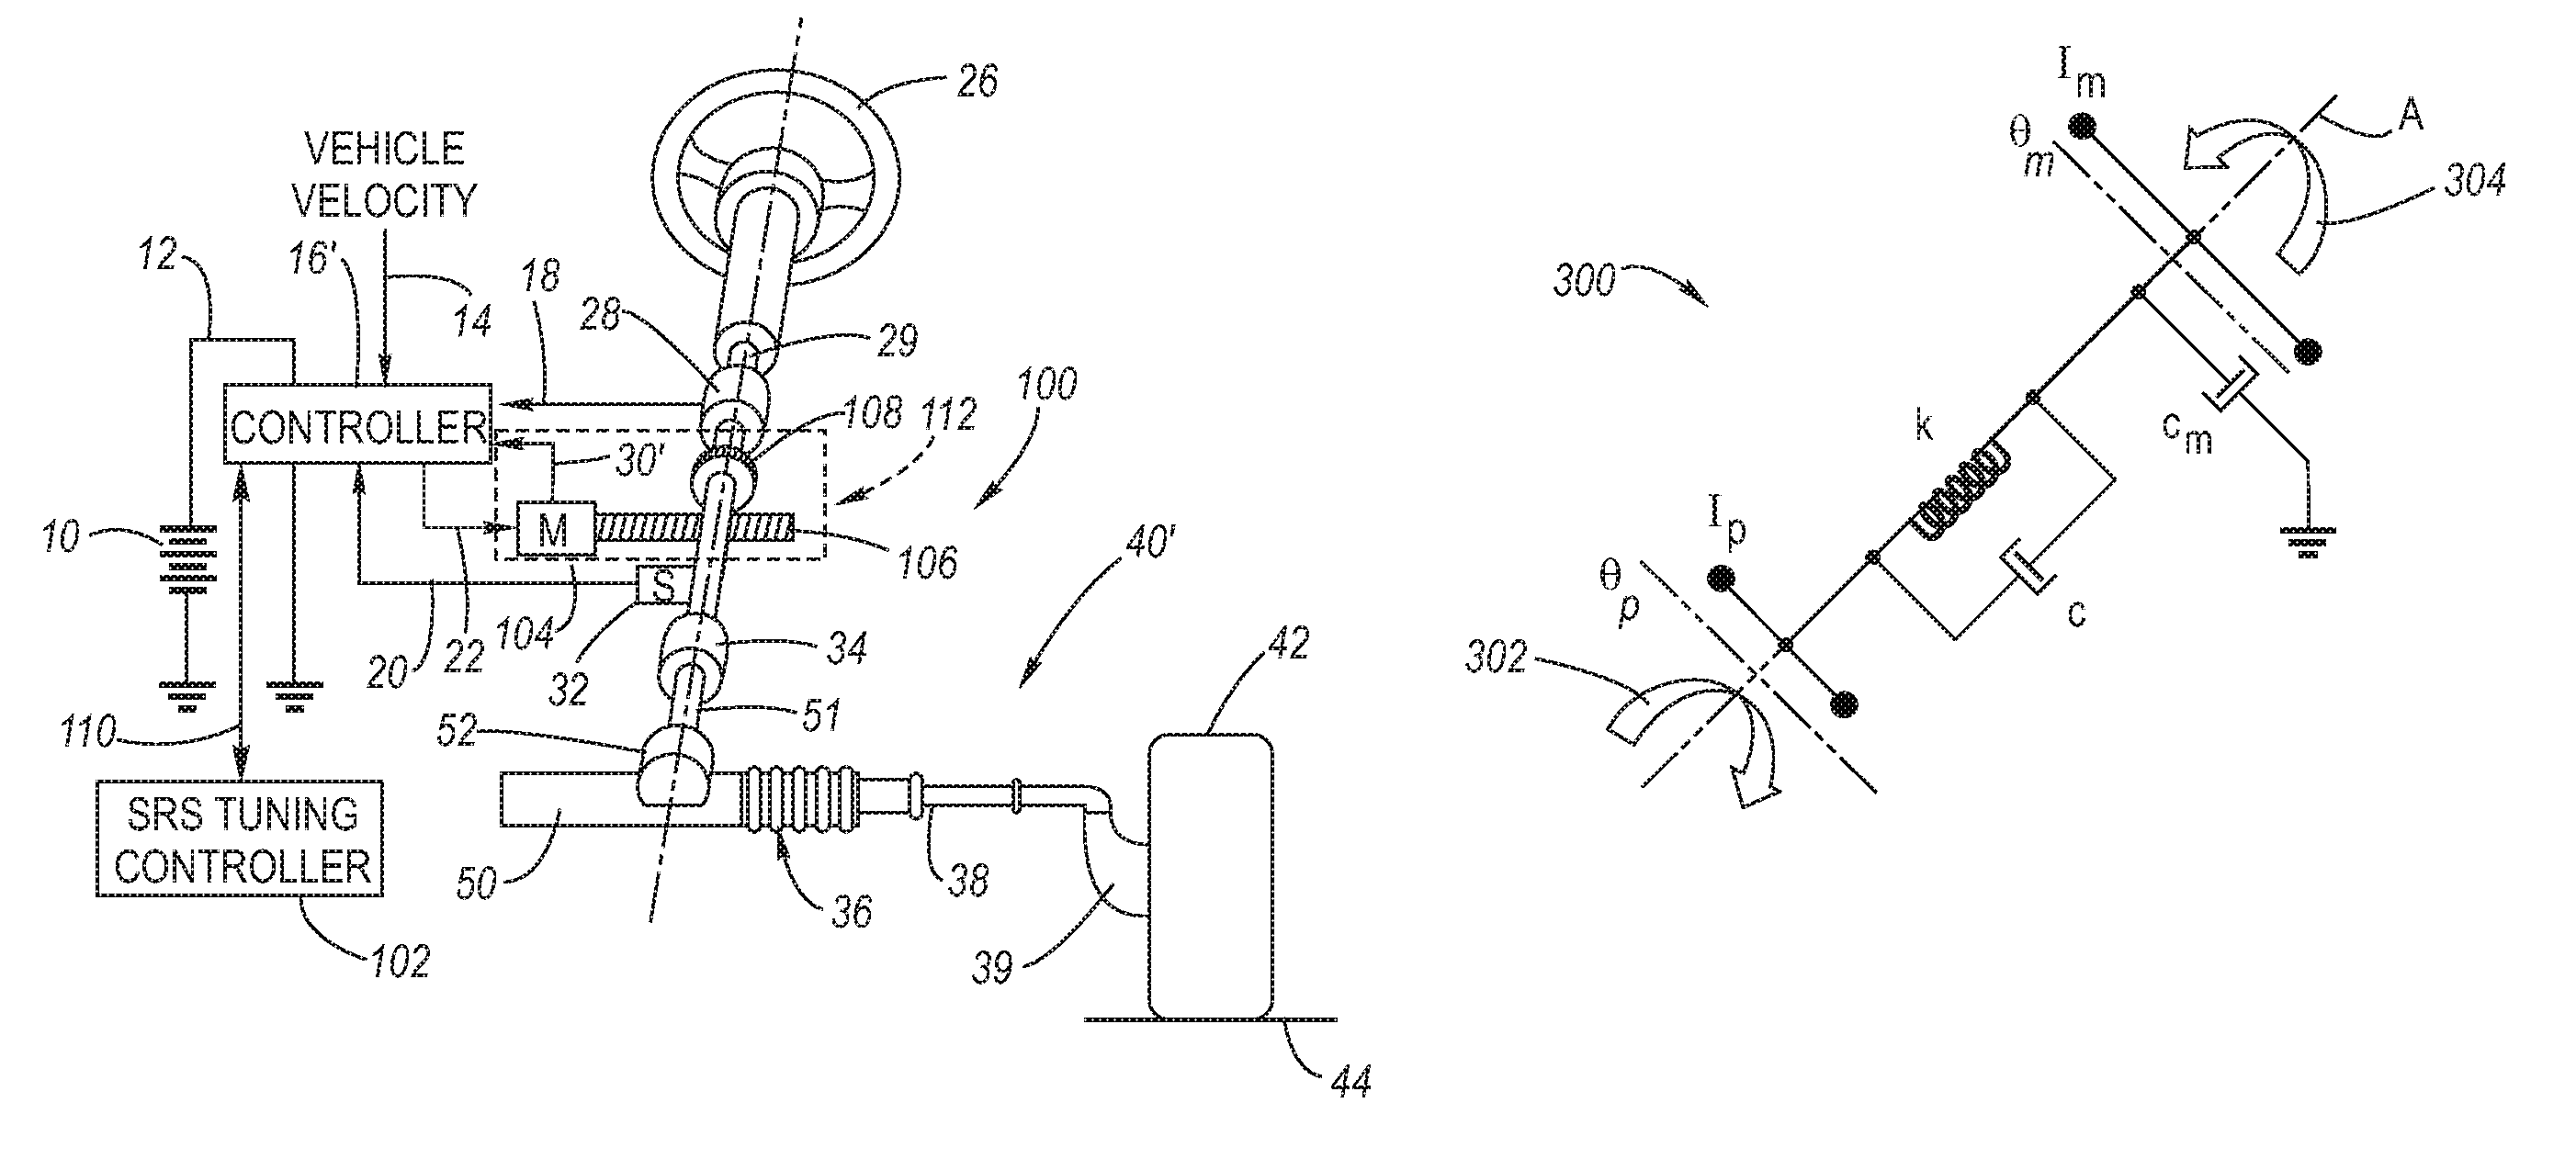 Method for attenuating smooth road shake in an electric power steering system